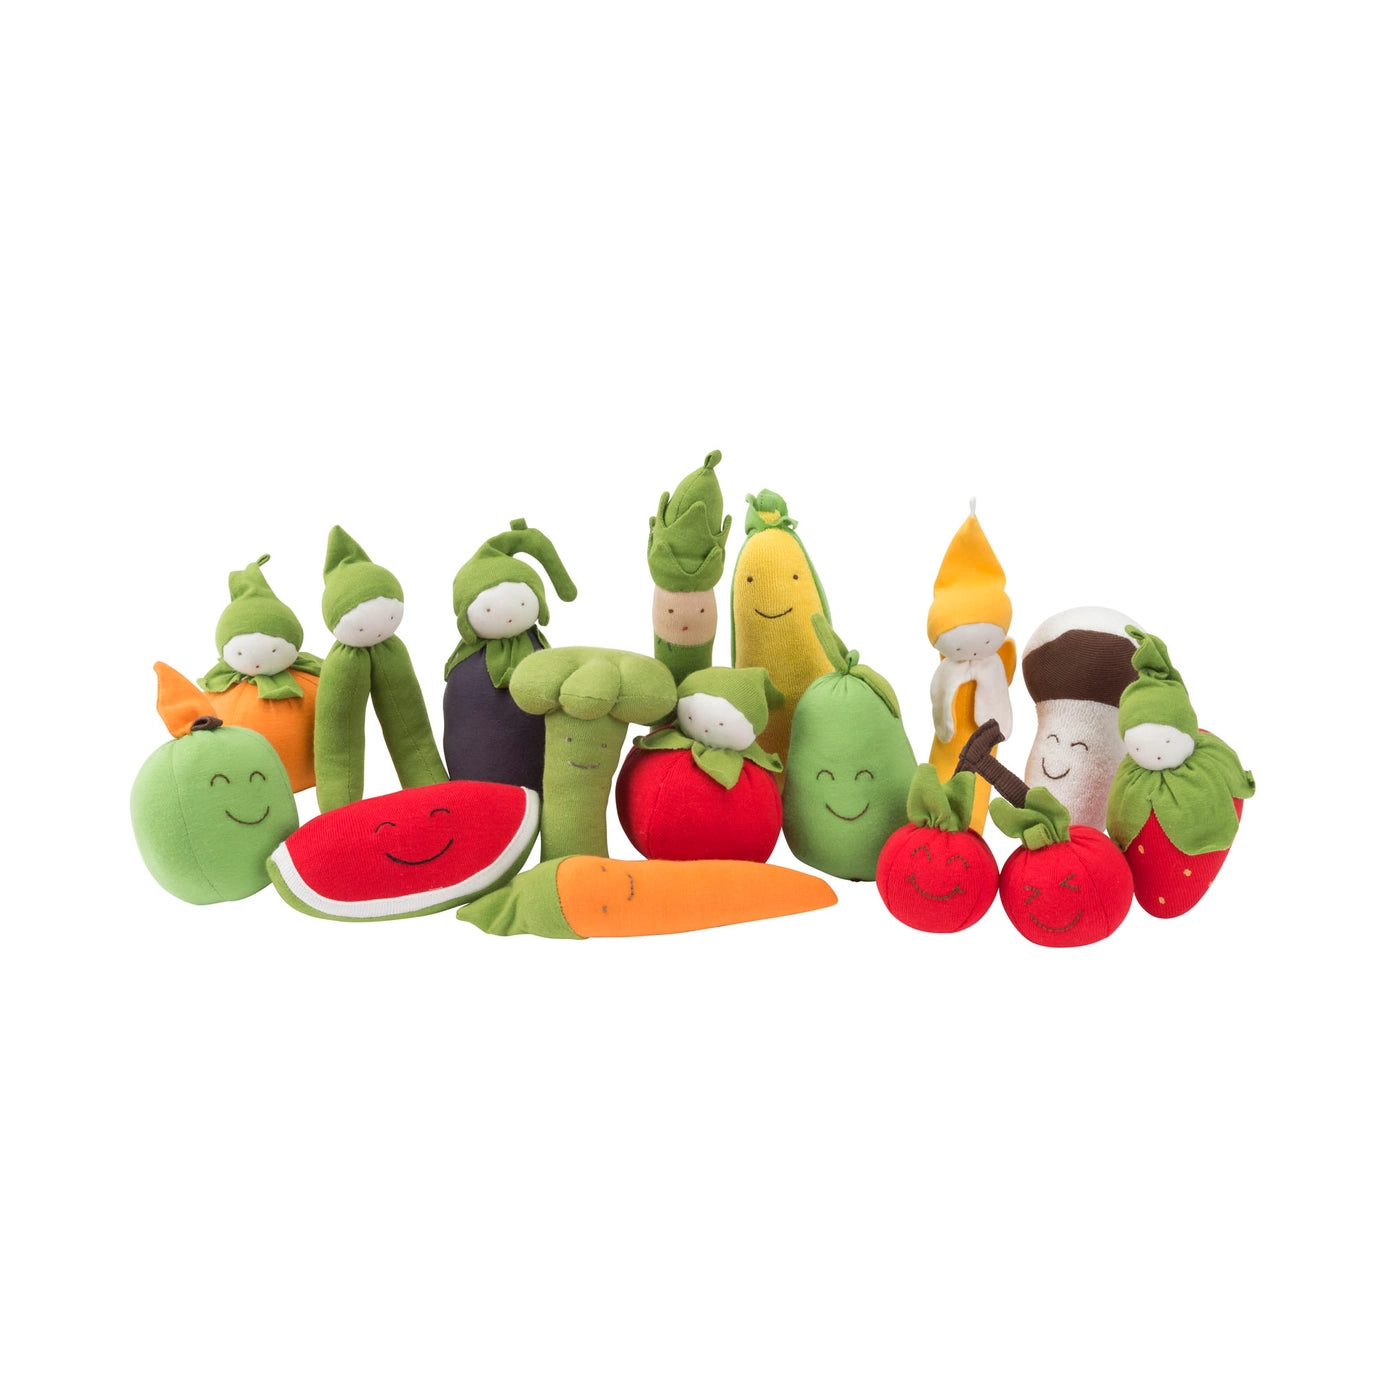 Organic Fruit and veggire Teething Toys by under the nile